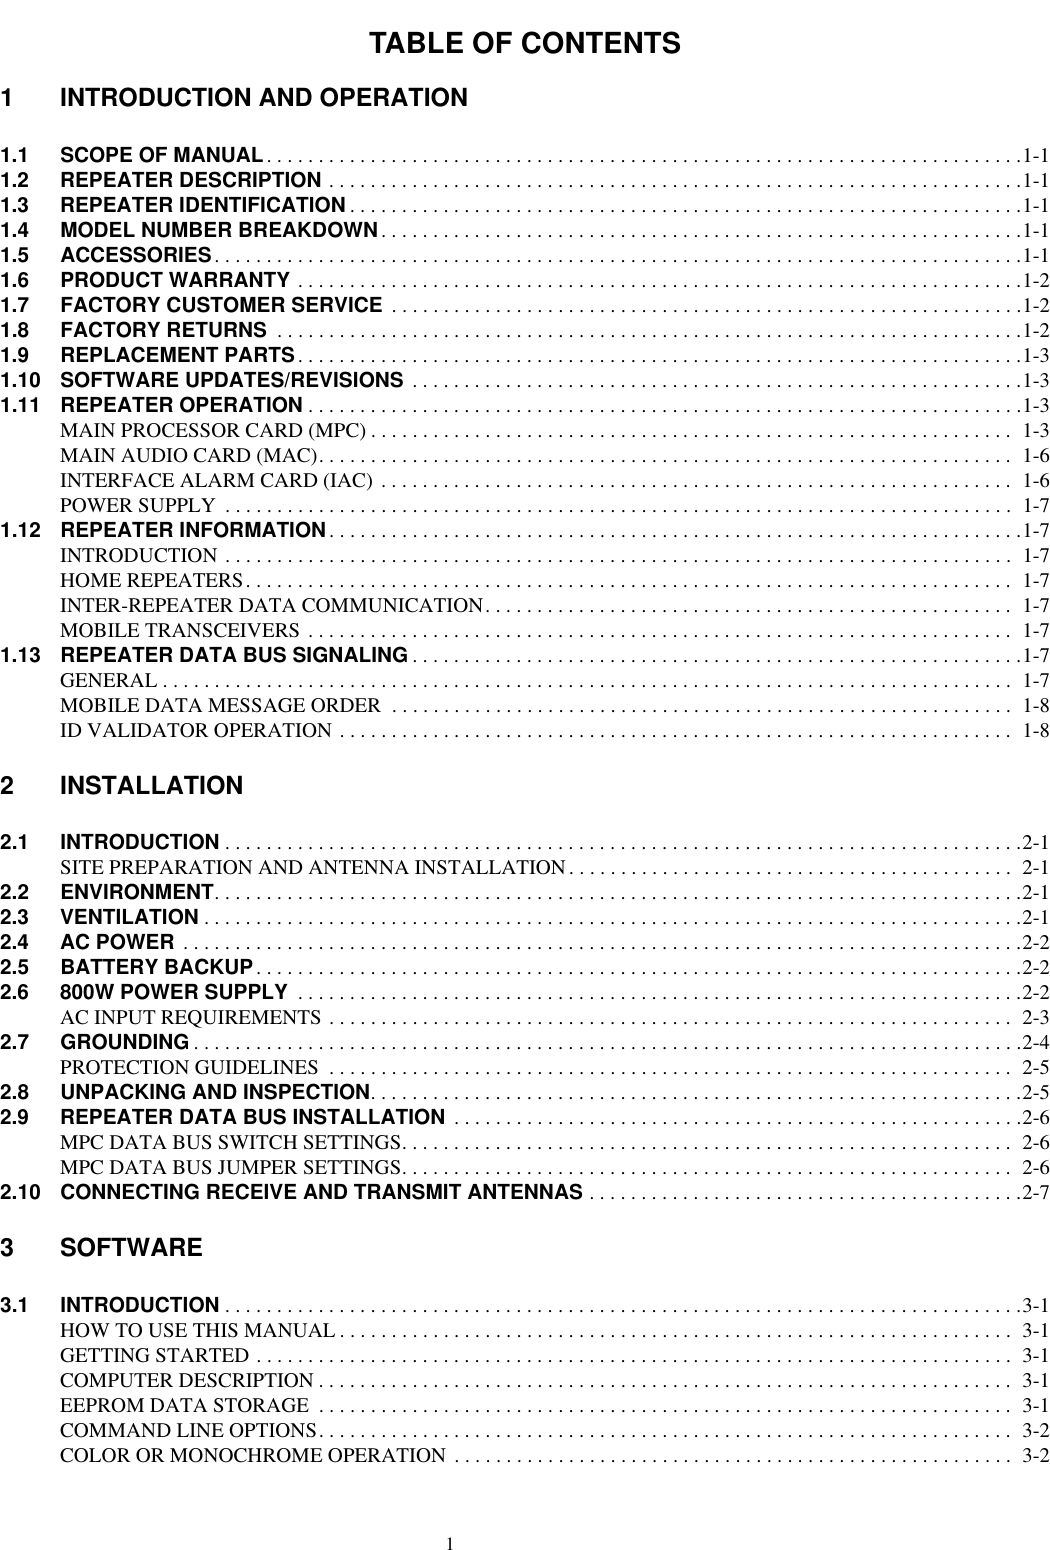 TABLE OF CONTENTS11 INTRODUCTION AND OPERATION1.1 SCOPE OF MANUAL. . . . . . . . . . . . . . . . . . . . . . . . . . . . . . . . . . . . . . . . . . . . . . . . . . . . . . . . . . . . . . . . . . . . . . . . .1-11.2 REPEATER DESCRIPTION . . . . . . . . . . . . . . . . . . . . . . . . . . . . . . . . . . . . . . . . . . . . . . . . . . . . . . . . . . . . . . . . . . .1-11.3 REPEATER IDENTIFICATION . . . . . . . . . . . . . . . . . . . . . . . . . . . . . . . . . . . . . . . . . . . . . . . . . . . . . . . . . . . . . . . . .1-11.4 MODEL NUMBER BREAKDOWN. . . . . . . . . . . . . . . . . . . . . . . . . . . . . . . . . . . . . . . . . . . . . . . . . . . . . . . . . . . . . .1-11.5 ACCESSORIES. . . . . . . . . . . . . . . . . . . . . . . . . . . . . . . . . . . . . . . . . . . . . . . . . . . . . . . . . . . . . . . . . . . . . . . . . . . . . .1-11.6 PRODUCT WARRANTY . . . . . . . . . . . . . . . . . . . . . . . . . . . . . . . . . . . . . . . . . . . . . . . . . . . . . . . . . . . . . . . . . . . . . .1-21.7 FACTORY CUSTOMER SERVICE  . . . . . . . . . . . . . . . . . . . . . . . . . . . . . . . . . . . . . . . . . . . . . . . . . . . . . . . . . . . . .1-21.8 FACTORY RETURNS  . . . . . . . . . . . . . . . . . . . . . . . . . . . . . . . . . . . . . . . . . . . . . . . . . . . . . . . . . . . . . . . . . . . . . . . .1-21.9 REPLACEMENT PARTS . . . . . . . . . . . . . . . . . . . . . . . . . . . . . . . . . . . . . . . . . . . . . . . . . . . . . . . . . . . . . . . . . . . . . .1-31.10 SOFTWARE UPDATES/REVISIONS  . . . . . . . . . . . . . . . . . . . . . . . . . . . . . . . . . . . . . . . . . . . . . . . . . . . . . . . . . . .1-31.11 REPEATER OPERATION . . . . . . . . . . . . . . . . . . . . . . . . . . . . . . . . . . . . . . . . . . . . . . . . . . . . . . . . . . . . . . . . . . . . .1-3MAIN PROCESSOR CARD (MPC) . . . . . . . . . . . . . . . . . . . . . . . . . . . . . . . . . . . . . . . . . . . . . . . . . . . . . . . . . . . . . .  1-3MAIN AUDIO CARD (MAC). . . . . . . . . . . . . . . . . . . . . . . . . . . . . . . . . . . . . . . . . . . . . . . . . . . . . . . . . . . . . . . . . . .  1-6INTERFACE ALARM CARD (IAC) . . . . . . . . . . . . . . . . . . . . . . . . . . . . . . . . . . . . . . . . . . . . . . . . . . . . . . . . . . . . .  1-6POWER SUPPLY  . . . . . . . . . . . . . . . . . . . . . . . . . . . . . . . . . . . . . . . . . . . . . . . . . . . . . . . . . . . . . . . . . . . . . . . . . . . .  1-71.12 REPEATER INFORMATION. . . . . . . . . . . . . . . . . . . . . . . . . . . . . . . . . . . . . . . . . . . . . . . . . . . . . . . . . . . . . . . . . . .1-7INTRODUCTION . . . . . . . . . . . . . . . . . . . . . . . . . . . . . . . . . . . . . . . . . . . . . . . . . . . . . . . . . . . . . . . . . . . . . . . . . . . .  1-7HOME REPEATERS. . . . . . . . . . . . . . . . . . . . . . . . . . . . . . . . . . . . . . . . . . . . . . . . . . . . . . . . . . . . . . . . . . . . . . . . . .  1-7INTER-REPEATER DATA COMMUNICATION. . . . . . . . . . . . . . . . . . . . . . . . . . . . . . . . . . . . . . . . . . . . . . . . . . .  1-7MOBILE TRANSCEIVERS . . . . . . . . . . . . . . . . . . . . . . . . . . . . . . . . . . . . . . . . . . . . . . . . . . . . . . . . . . . . . . . . . . . .  1-71.13 REPEATER DATA BUS SIGNALING . . . . . . . . . . . . . . . . . . . . . . . . . . . . . . . . . . . . . . . . . . . . . . . . . . . . . . . . . . .1-7GENERAL . . . . . . . . . . . . . . . . . . . . . . . . . . . . . . . . . . . . . . . . . . . . . . . . . . . . . . . . . . . . . . . . . . . . . . . . . . . . . . . . . .  1-7MOBILE DATA MESSAGE ORDER  . . . . . . . . . . . . . . . . . . . . . . . . . . . . . . . . . . . . . . . . . . . . . . . . . . . . . . . . . . . .  1-8ID VALIDATOR OPERATION . . . . . . . . . . . . . . . . . . . . . . . . . . . . . . . . . . . . . . . . . . . . . . . . . . . . . . . . . . . . . . . . .  1-82 INSTALLATION2.1 INTRODUCTION . . . . . . . . . . . . . . . . . . . . . . . . . . . . . . . . . . . . . . . . . . . . . . . . . . . . . . . . . . . . . . . . . . . . . . . . . . . . .2-1SITE PREPARATION AND ANTENNA INSTALLATION. . . . . . . . . . . . . . . . . . . . . . . . . . . . . . . . . . . . . . . . . . .  2-12.2 ENVIRONMENT. . . . . . . . . . . . . . . . . . . . . . . . . . . . . . . . . . . . . . . . . . . . . . . . . . . . . . . . . . . . . . . . . . . . . . . . . . . . . .2-12.3 VENTILATION . . . . . . . . . . . . . . . . . . . . . . . . . . . . . . . . . . . . . . . . . . . . . . . . . . . . . . . . . . . . . . . . . . . . . . . . . . . . . . .2-12.4 AC POWER  . . . . . . . . . . . . . . . . . . . . . . . . . . . . . . . . . . . . . . . . . . . . . . . . . . . . . . . . . . . . . . . . . . . . . . . . . . . . . . . . .2-22.5 BATTERY BACKUP. . . . . . . . . . . . . . . . . . . . . . . . . . . . . . . . . . . . . . . . . . . . . . . . . . . . . . . . . . . . . . . . . . . . . . . . . .2-22.6 800W POWER SUPPLY  . . . . . . . . . . . . . . . . . . . . . . . . . . . . . . . . . . . . . . . . . . . . . . . . . . . . . . . . . . . . . . . . . . . . . .2-2AC INPUT REQUIREMENTS . . . . . . . . . . . . . . . . . . . . . . . . . . . . . . . . . . . . . . . . . . . . . . . . . . . . . . . . . . . . . . . . . .  2-32.7 GROUNDING . . . . . . . . . . . . . . . . . . . . . . . . . . . . . . . . . . . . . . . . . . . . . . . . . . . . . . . . . . . . . . . . . . . . . . . . . . . . . . . .2-4PROTECTION GUIDELINES  . . . . . . . . . . . . . . . . . . . . . . . . . . . . . . . . . . . . . . . . . . . . . . . . . . . . . . . . . . . . . . . . . .  2-52.8 UNPACKING AND INSPECTION. . . . . . . . . . . . . . . . . . . . . . . . . . . . . . . . . . . . . . . . . . . . . . . . . . . . . . . . . . . . . . .2-52.9 REPEATER DATA BUS INSTALLATION  . . . . . . . . . . . . . . . . . . . . . . . . . . . . . . . . . . . . . . . . . . . . . . . . . . . . . . .2-6MPC DATA BUS SWITCH SETTINGS. . . . . . . . . . . . . . . . . . . . . . . . . . . . . . . . . . . . . . . . . . . . . . . . . . . . . . . . . . .  2-6MPC DATA BUS JUMPER SETTINGS. . . . . . . . . . . . . . . . . . . . . . . . . . . . . . . . . . . . . . . . . . . . . . . . . . . . . . . . . . .  2-62.10 CONNECTING RECEIVE AND TRANSMIT ANTENNAS . . . . . . . . . . . . . . . . . . . . . . . . . . . . . . . . . . . . . . . . . .2-73 SOFTWARE3.1 INTRODUCTION . . . . . . . . . . . . . . . . . . . . . . . . . . . . . . . . . . . . . . . . . . . . . . . . . . . . . . . . . . . . . . . . . . . . . . . . . . . . .3-1HOW TO USE THIS MANUAL . . . . . . . . . . . . . . . . . . . . . . . . . . . . . . . . . . . . . . . . . . . . . . . . . . . . . . . . . . . . . . . . .  3-1GETTING STARTED . . . . . . . . . . . . . . . . . . . . . . . . . . . . . . . . . . . . . . . . . . . . . . . . . . . . . . . . . . . . . . . . . . . . . . . . .  3-1COMPUTER DESCRIPTION . . . . . . . . . . . . . . . . . . . . . . . . . . . . . . . . . . . . . . . . . . . . . . . . . . . . . . . . . . . . . . . . . . .  3-1EEPROM DATA STORAGE  . . . . . . . . . . . . . . . . . . . . . . . . . . . . . . . . . . . . . . . . . . . . . . . . . . . . . . . . . . . . . . . . . . .  3-1COMMAND LINE OPTIONS. . . . . . . . . . . . . . . . . . . . . . . . . . . . . . . . . . . . . . . . . . . . . . . . . . . . . . . . . . . . . . . . . . .  3-2COLOR OR MONOCHROME OPERATION . . . . . . . . . . . . . . . . . . . . . . . . . . . . . . . . . . . . . . . . . . . . . . . . . . . . . .  3-2